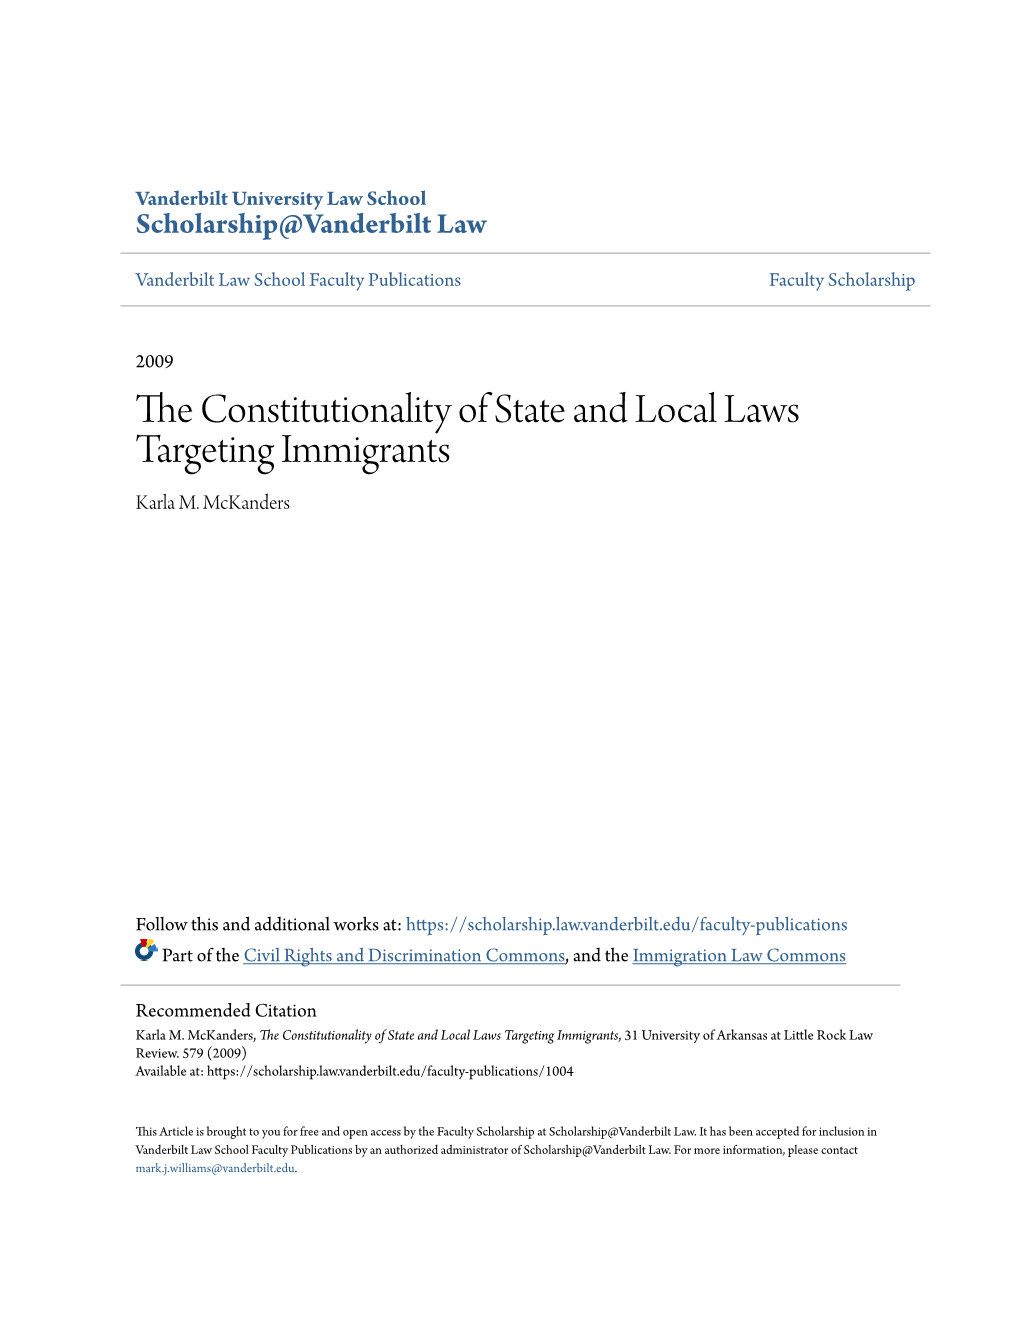 The Constitutionality of State and Local Laws Targeting Immigrants, 31 University of Arkansas at Little Rock Law Review